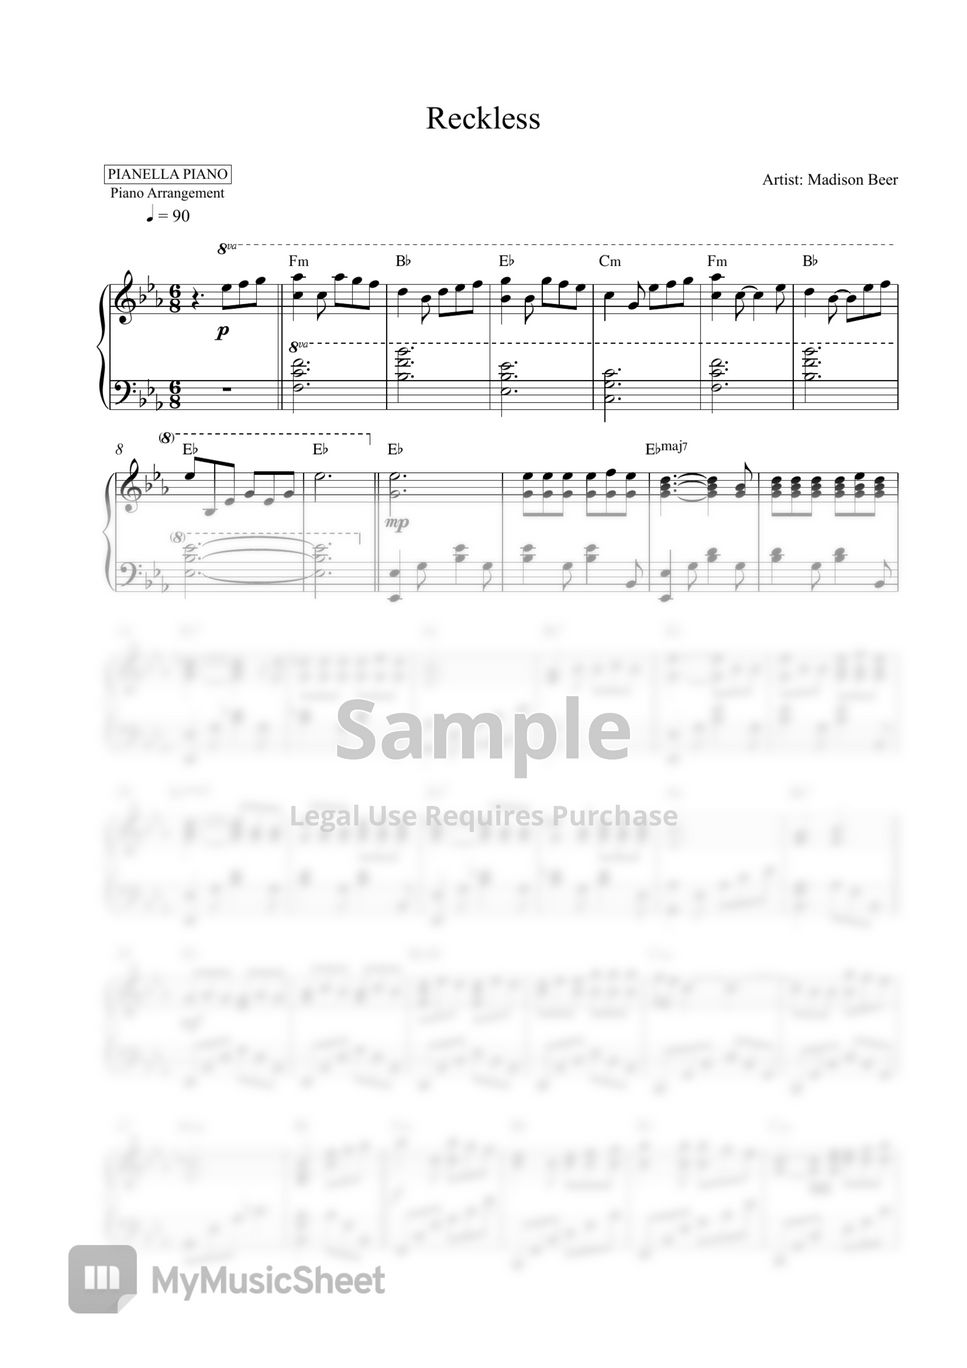 Madison Beer - Reckless (Piano Sheet) by Pianella Piano